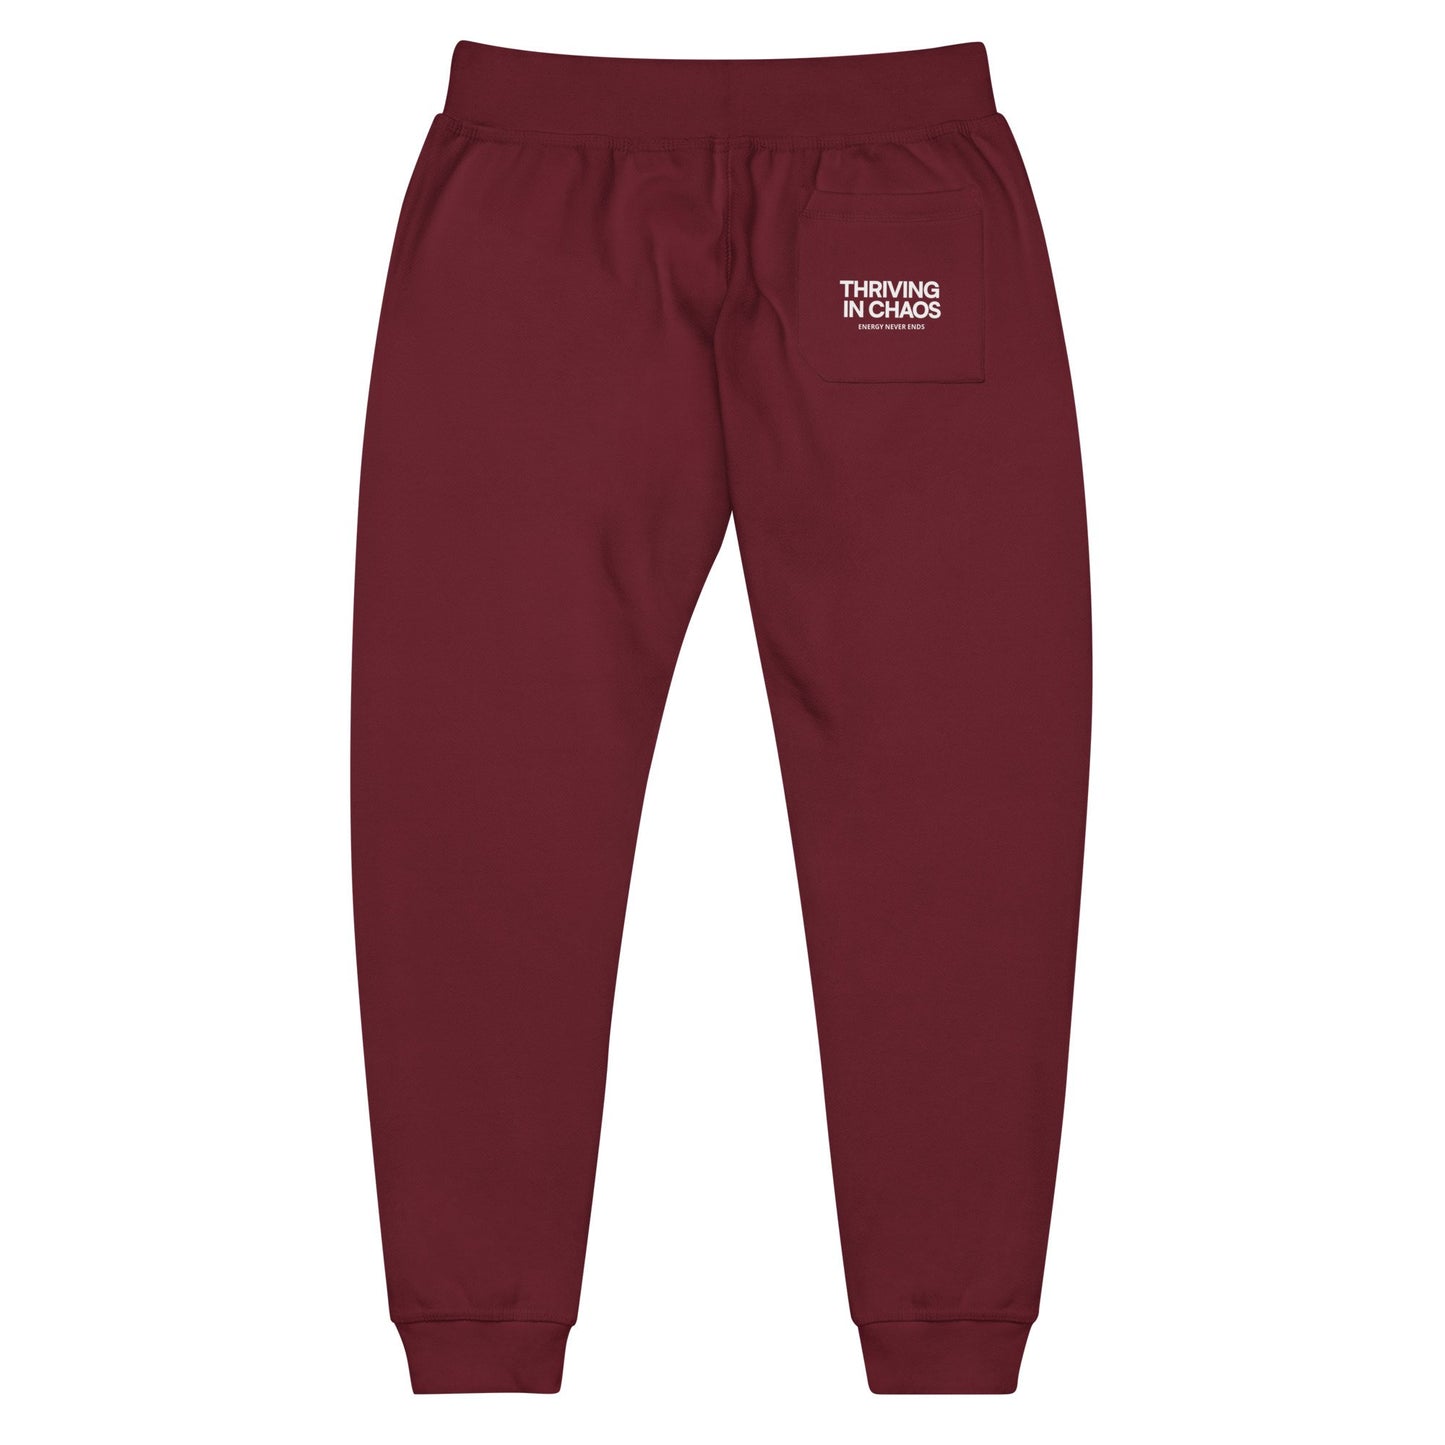 THRIVING IN CHAOS (MAROON RED SWEATS)